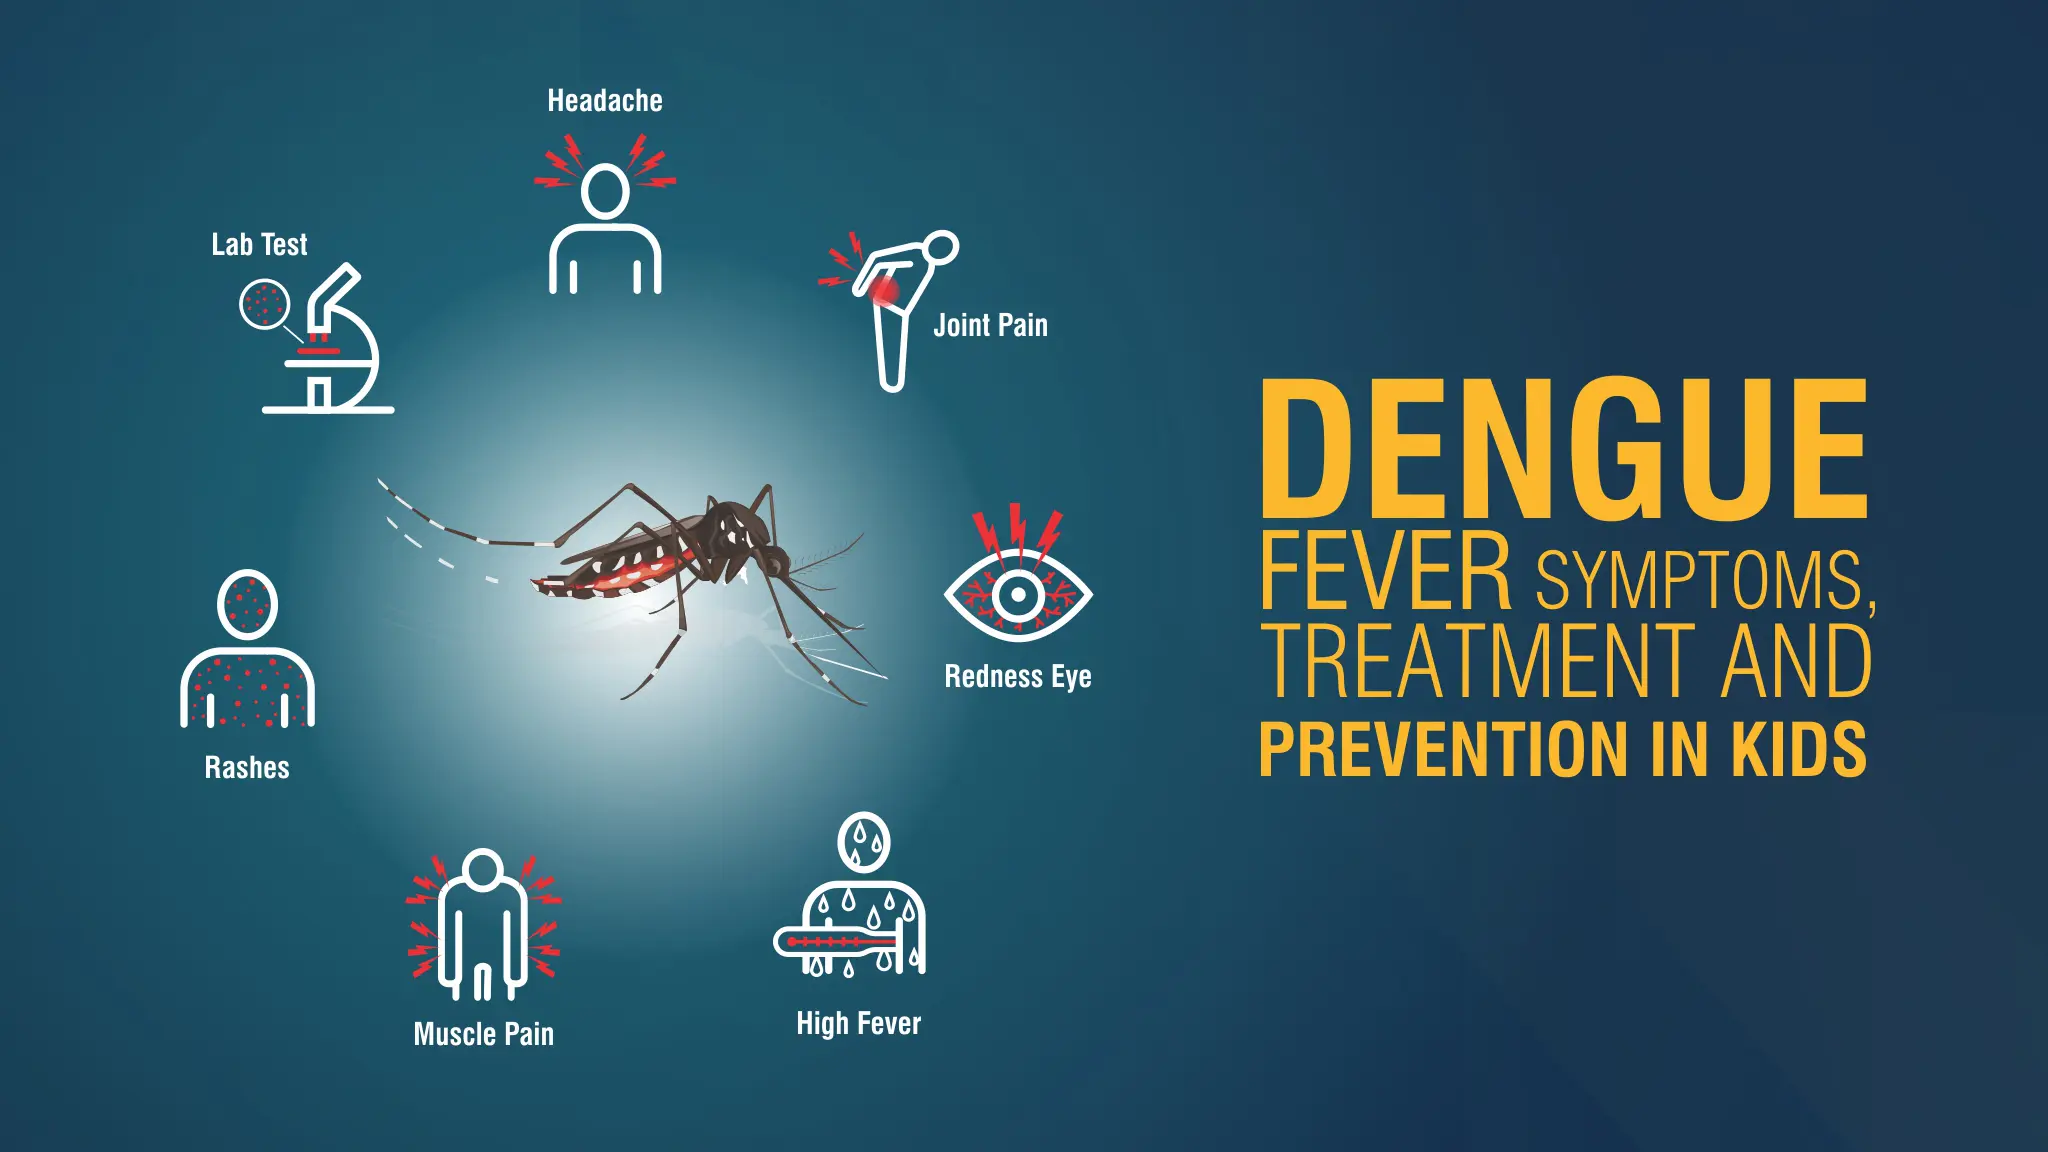 Dengue Fever: Symptoms, Treatment, And Prevention In Kids